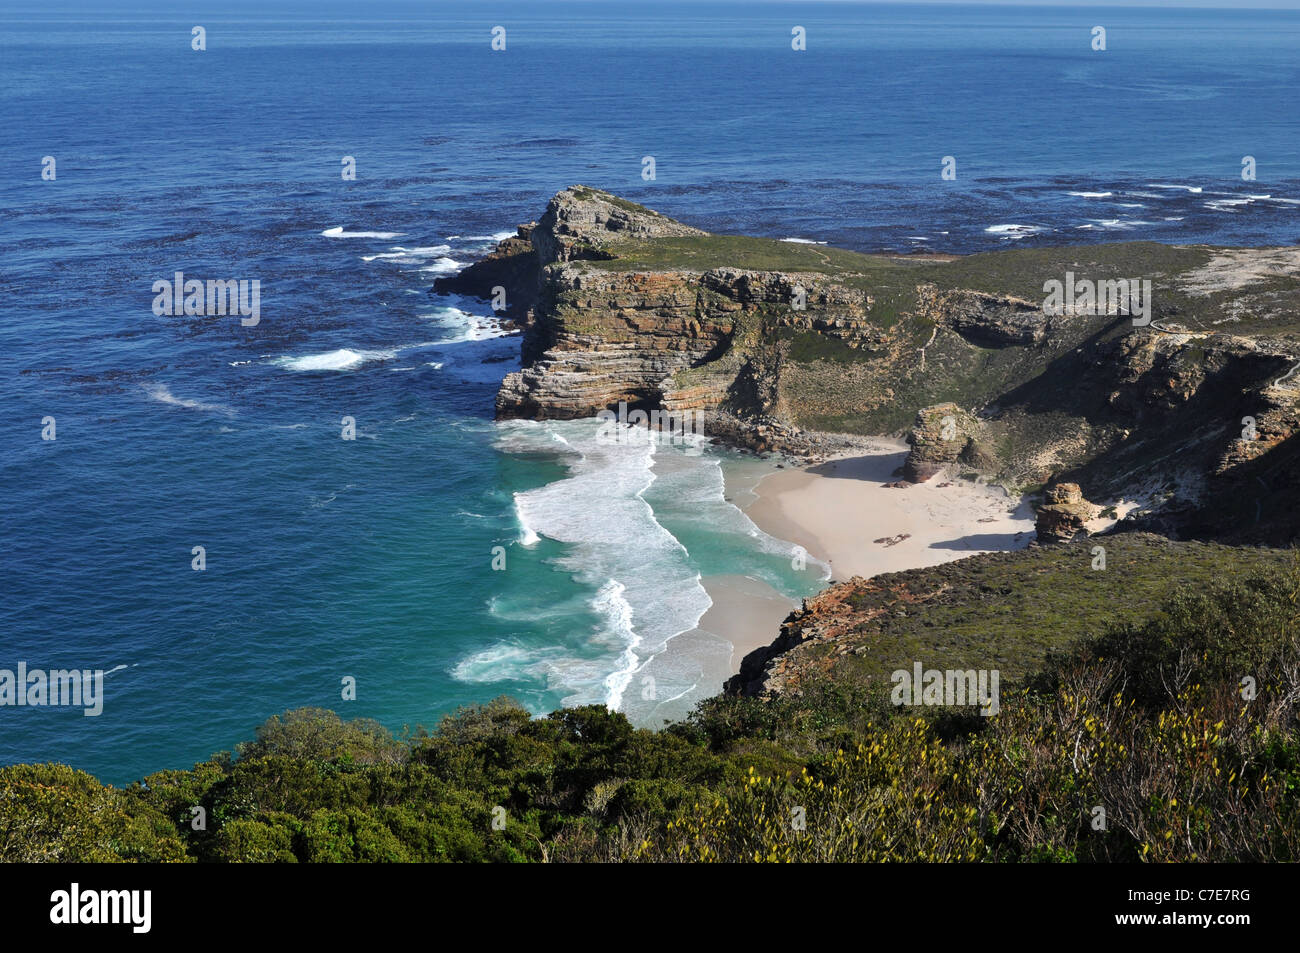 Diaz Beach, Table Mountain National Park, Cape of Good Hope, Cape Town, Western Cape, South Africa Stock Photo